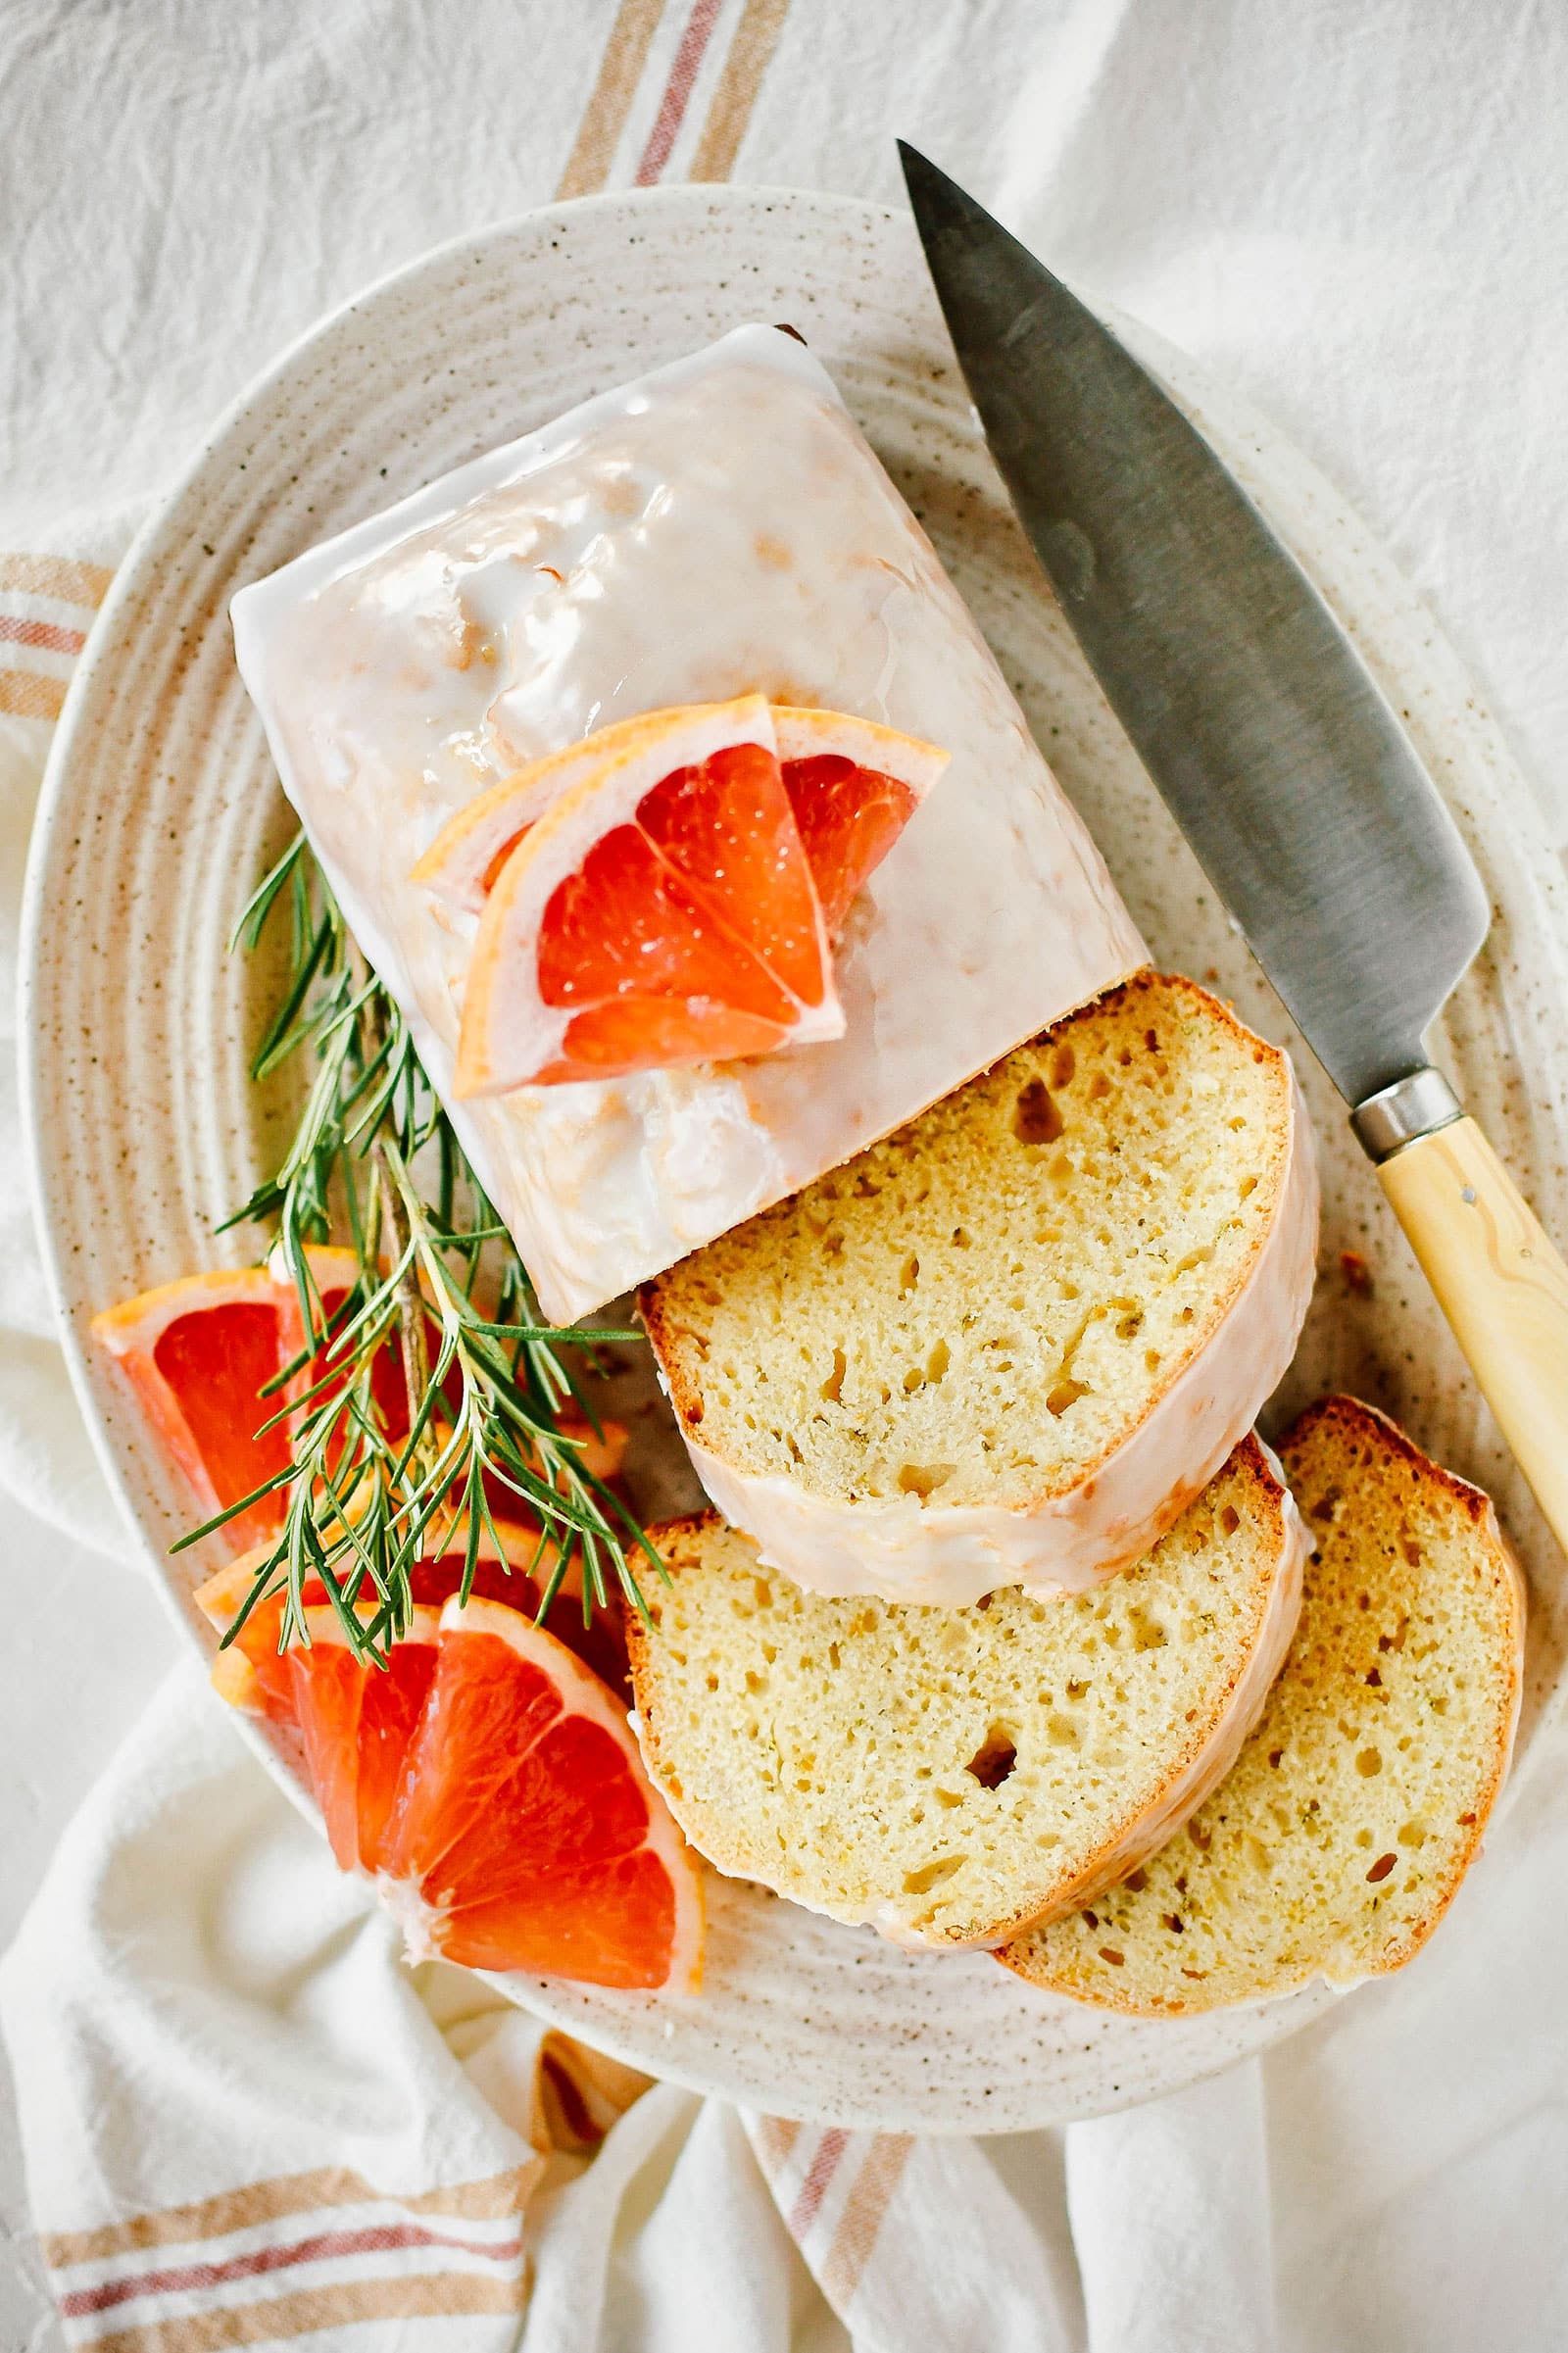 Stylized overhead shot of grapefruit-rosemary bread on a speckled ceramic platter, sliced open with a knife next to the loaf